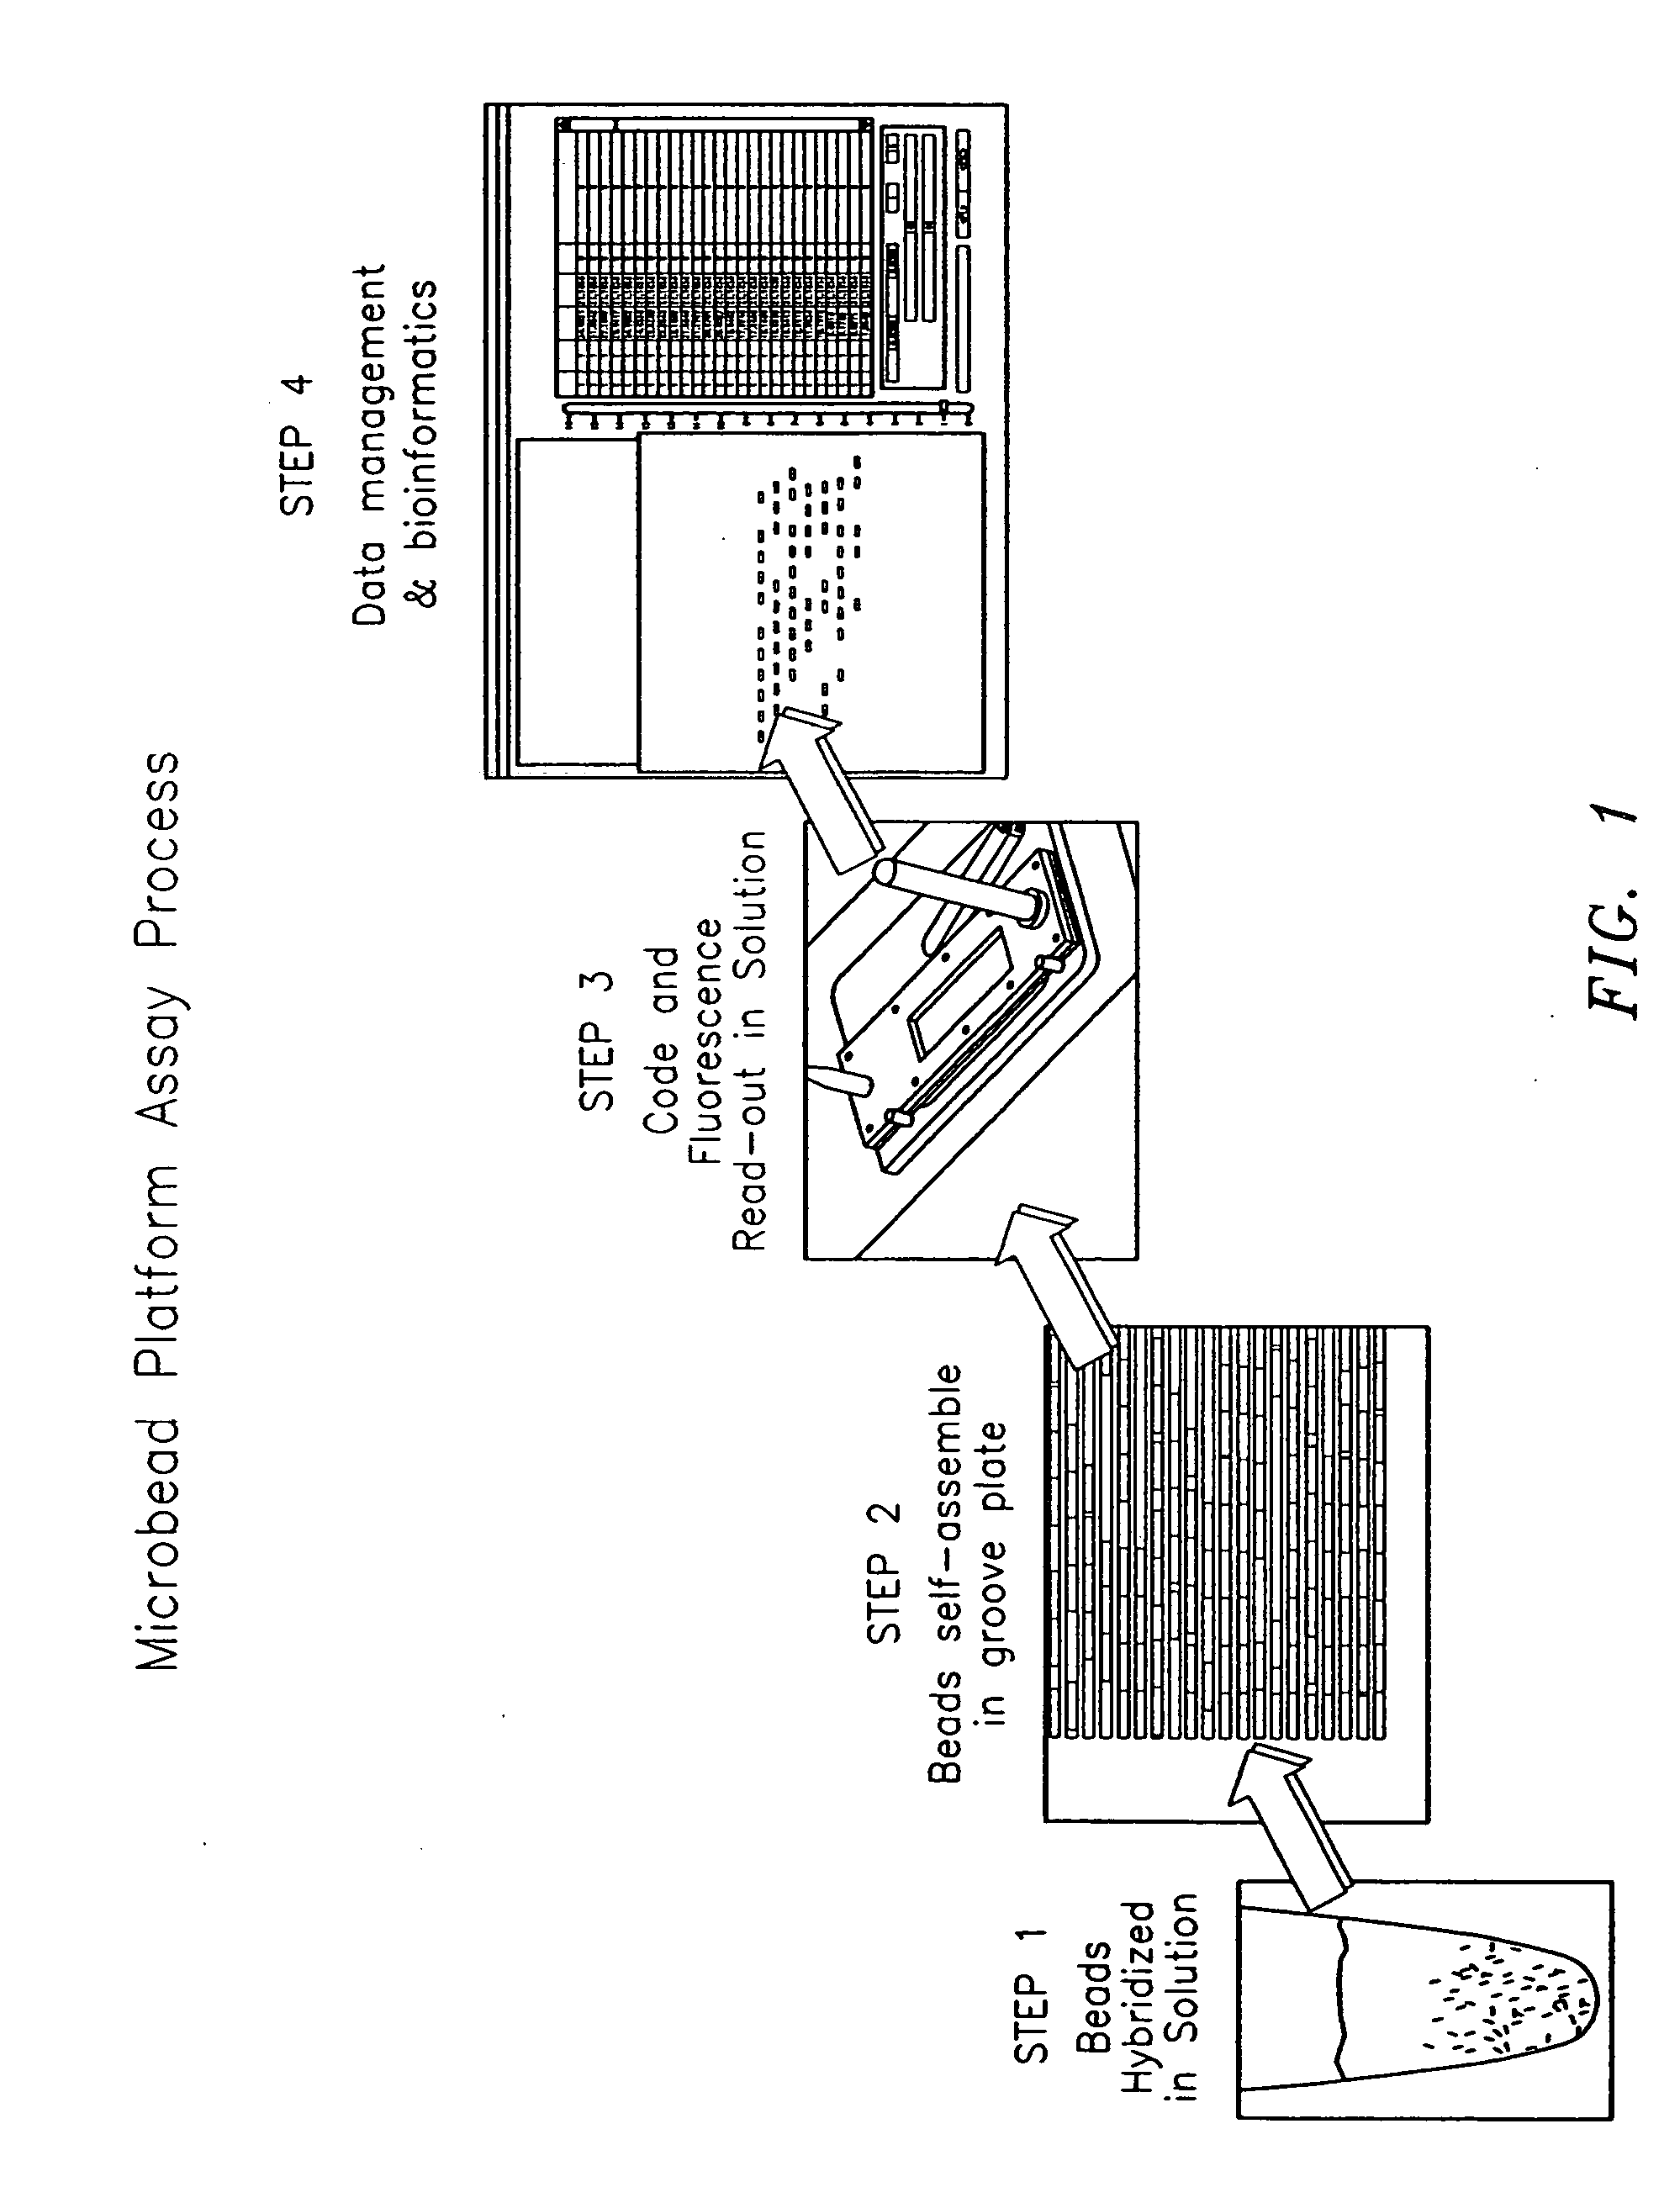 Multi-well plate with alignment grooves for encoded microparticles